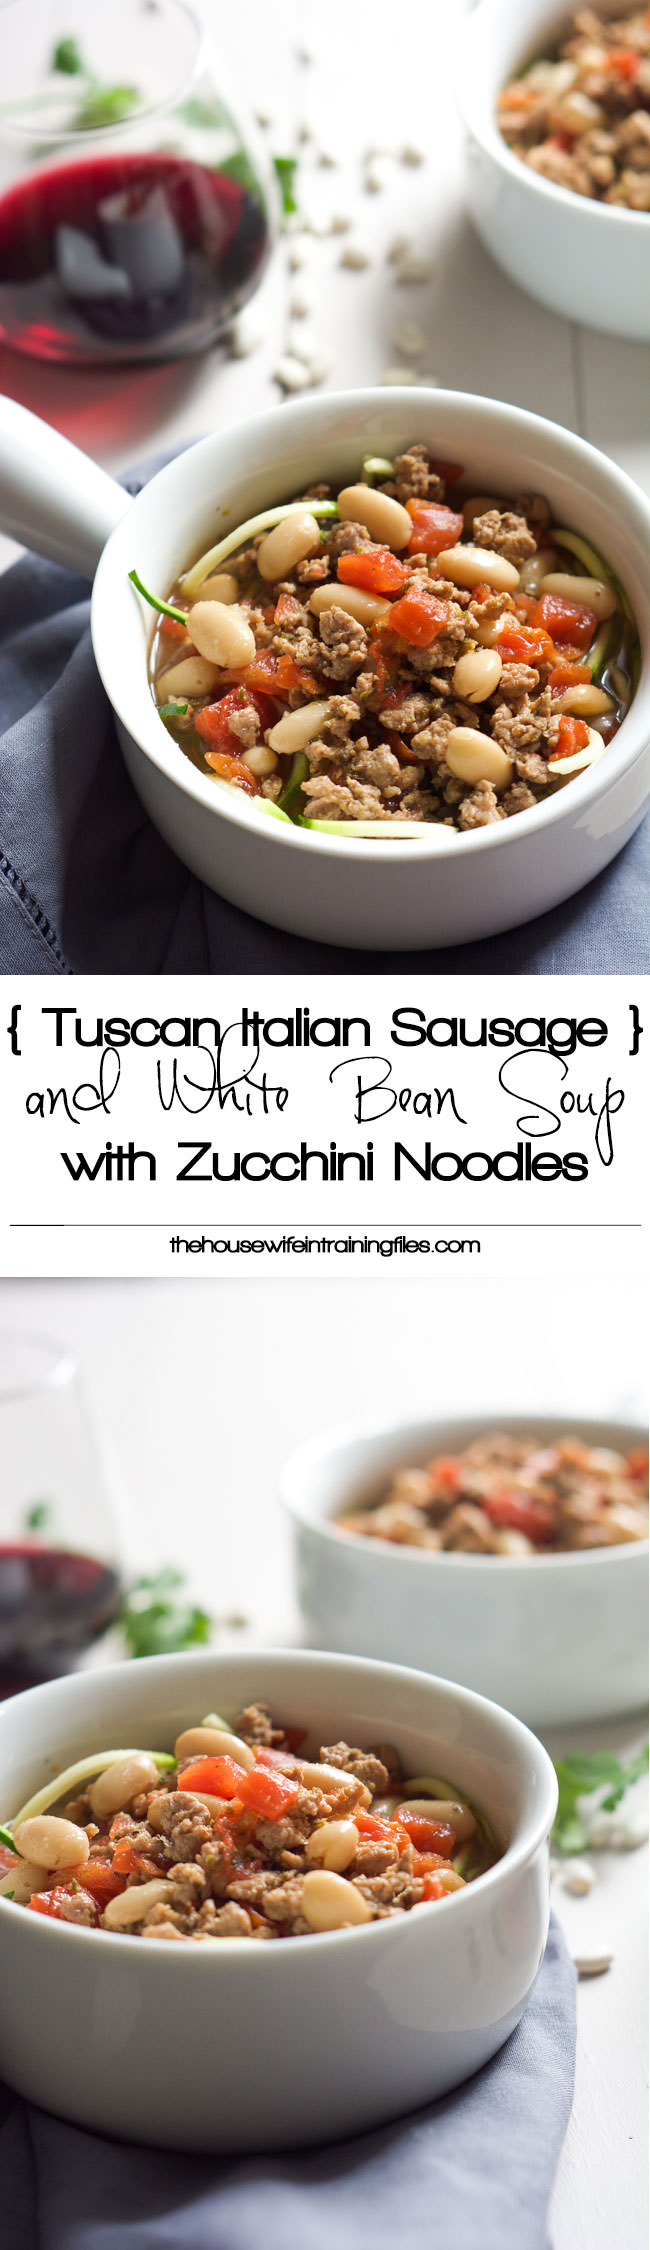 A quick and healthy 30 minute soup! Tuscan Italian Sausage and White Bean Soup with Zucchini Noodles is full of flavor yet lighter so you can indulge in a bowl or two! 